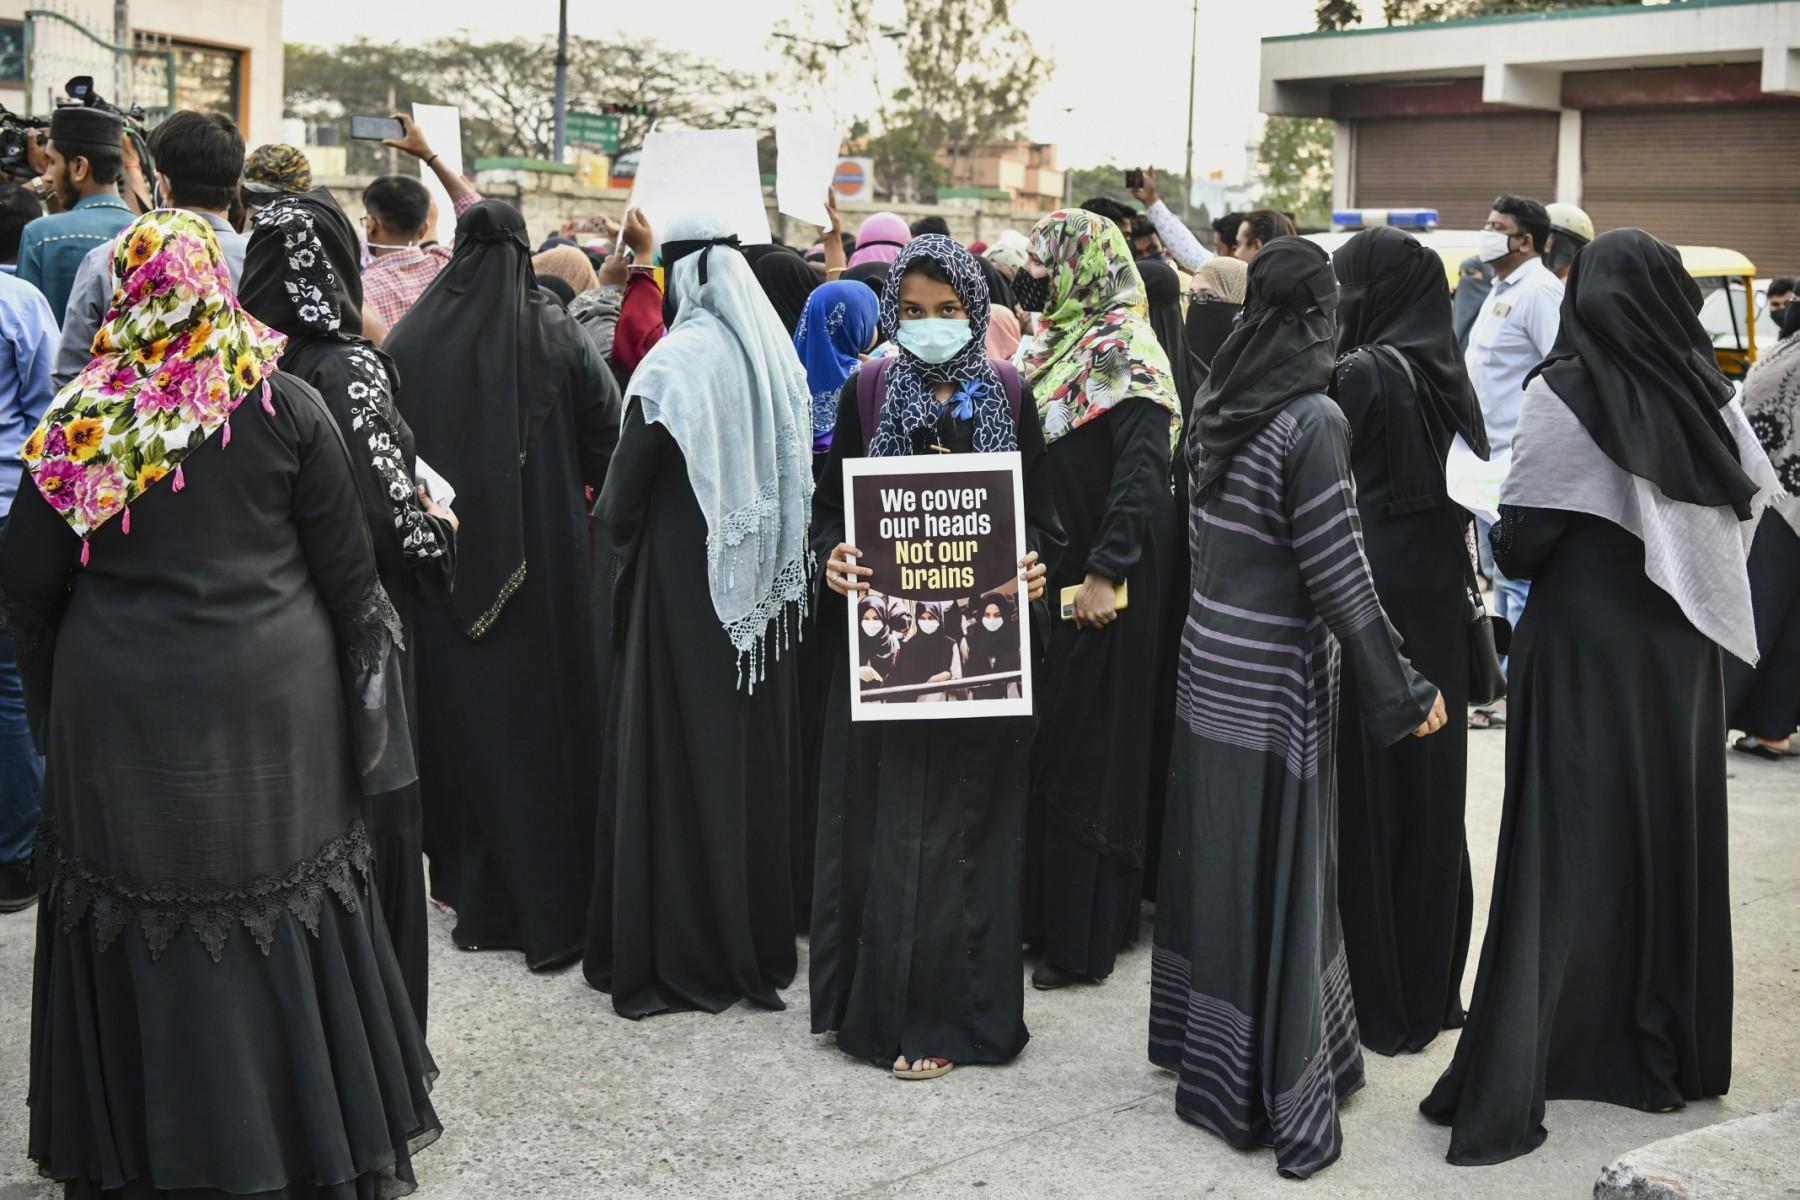 Muslim women hold placards during a demonstration after educational institutes in Karnataka denied entry to students for wearing hijabs, in Bangalore on Feb 7. Photo: AFP